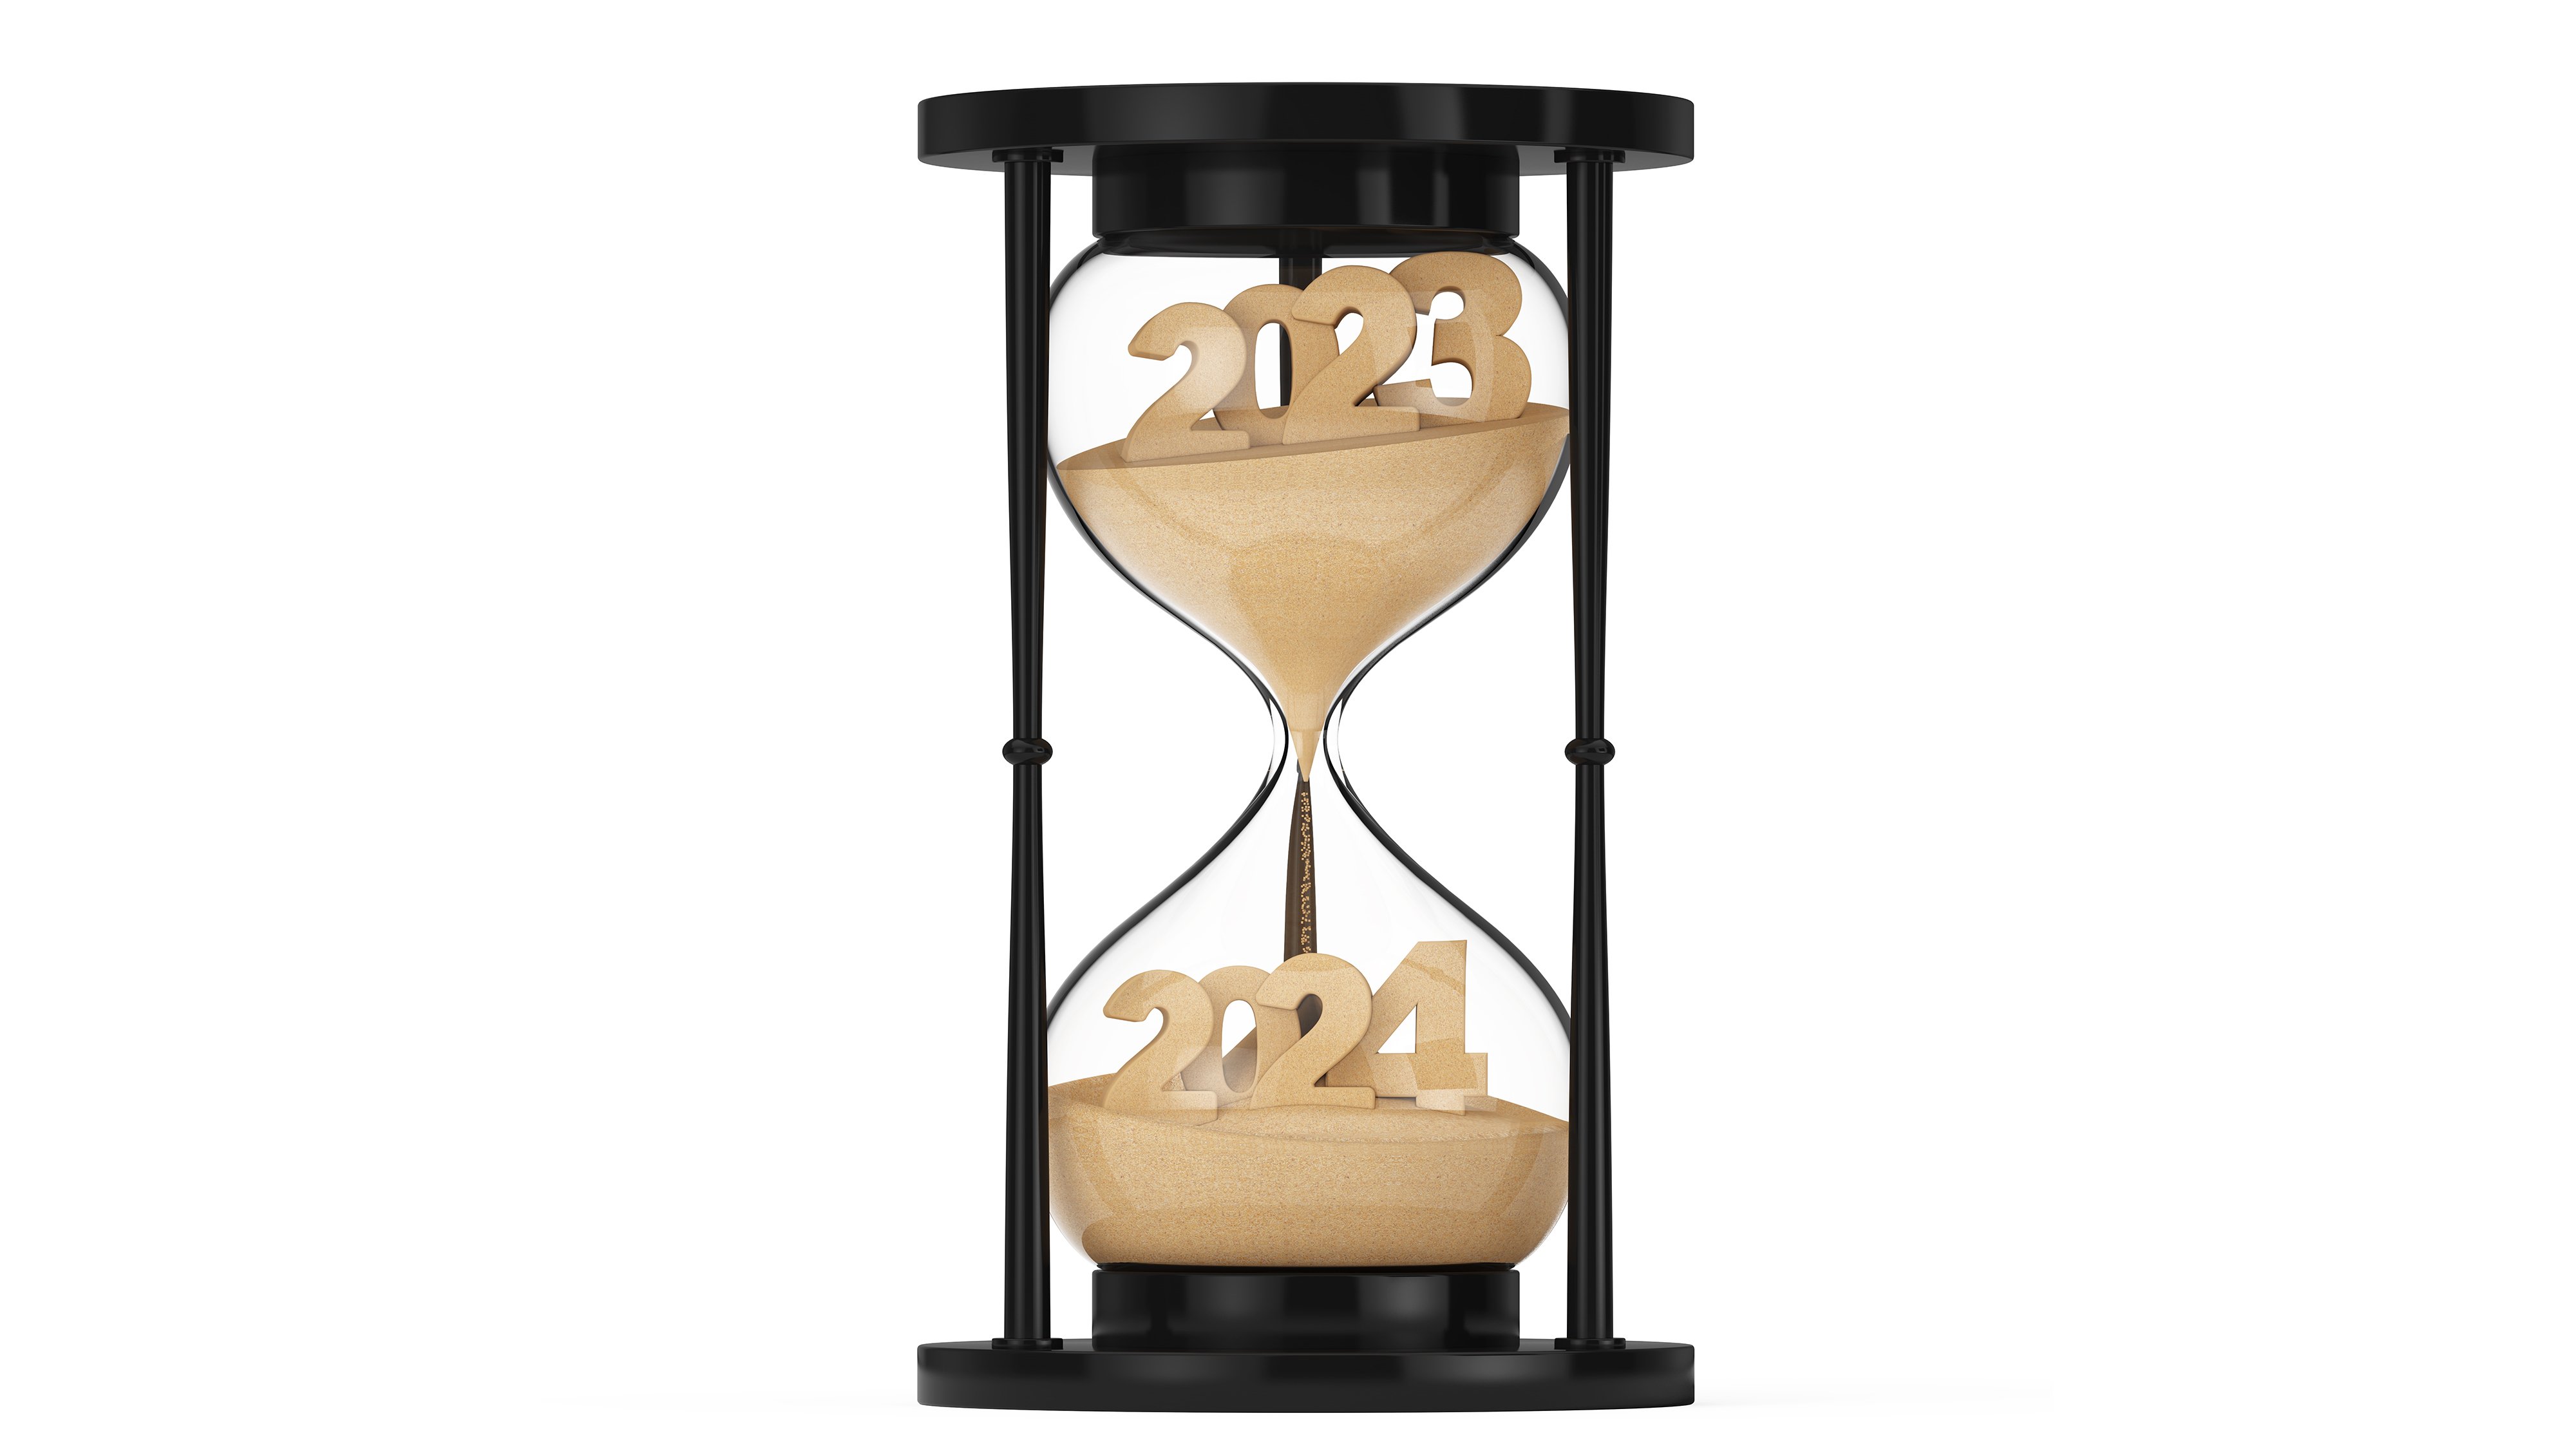 2023 2024 year ahead prediction forecast time sand hourglass